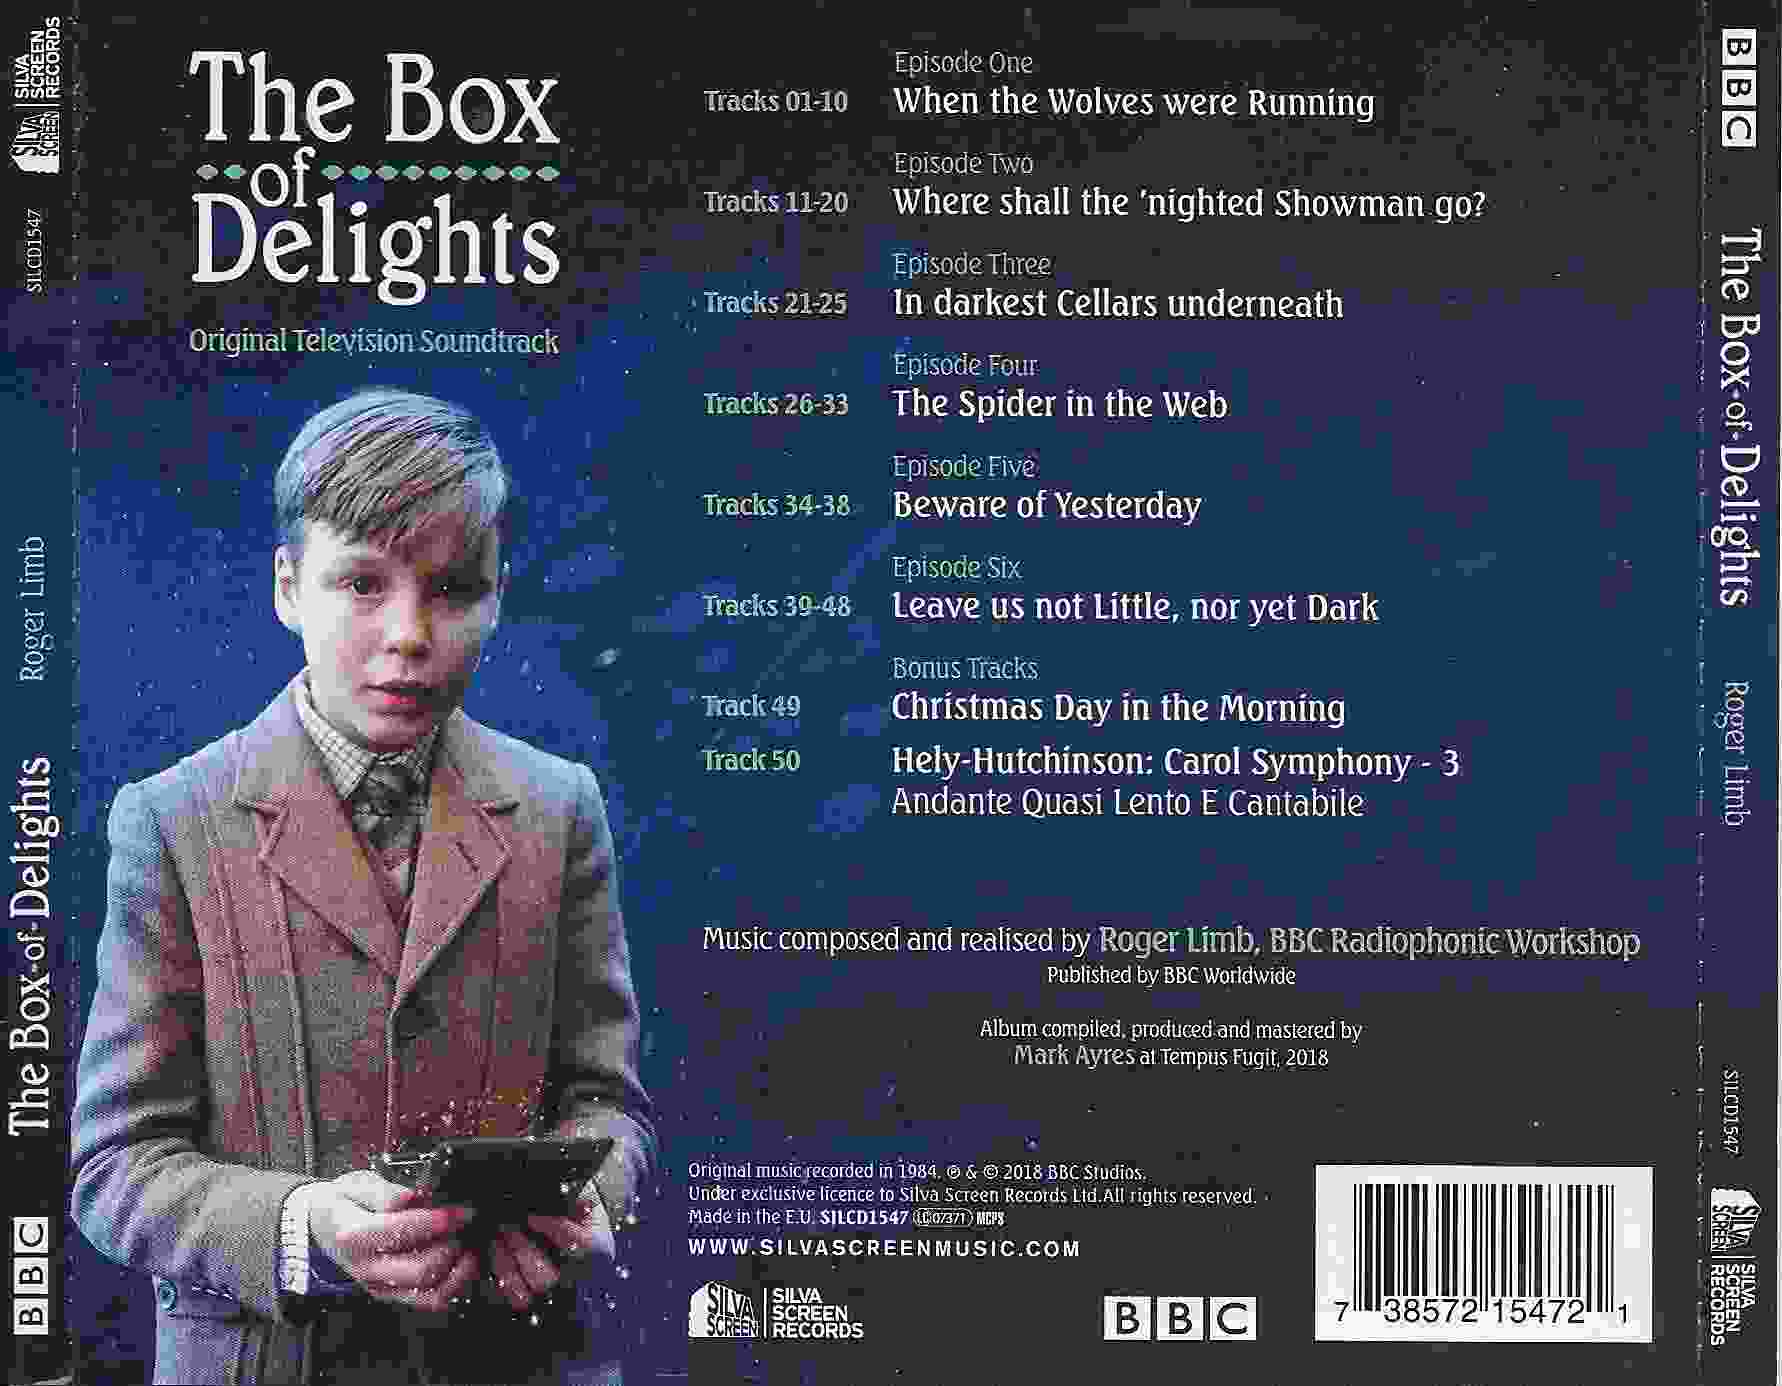 Picture of SILCD 1547 The box of delights by artist Roger Limb and the BBC Radiophonic Workshop from the BBC records and Tapes library